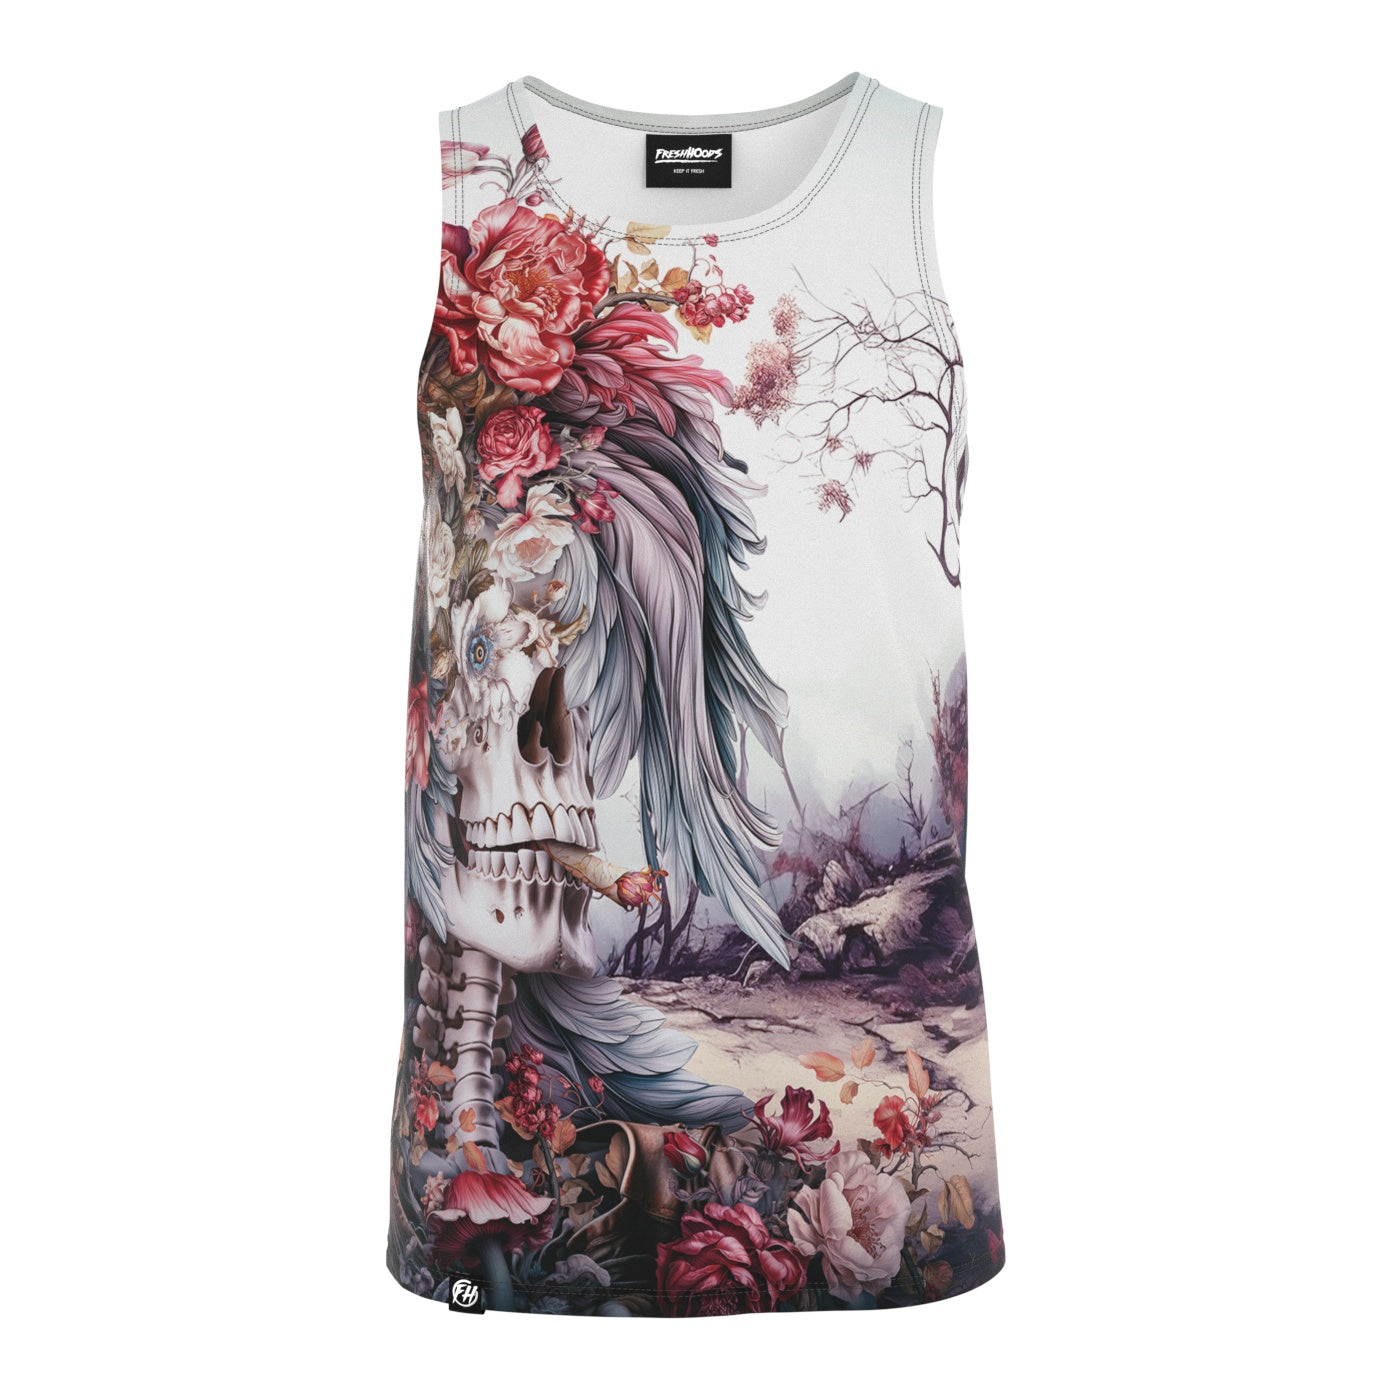 A Surreal Farewell Tank Top